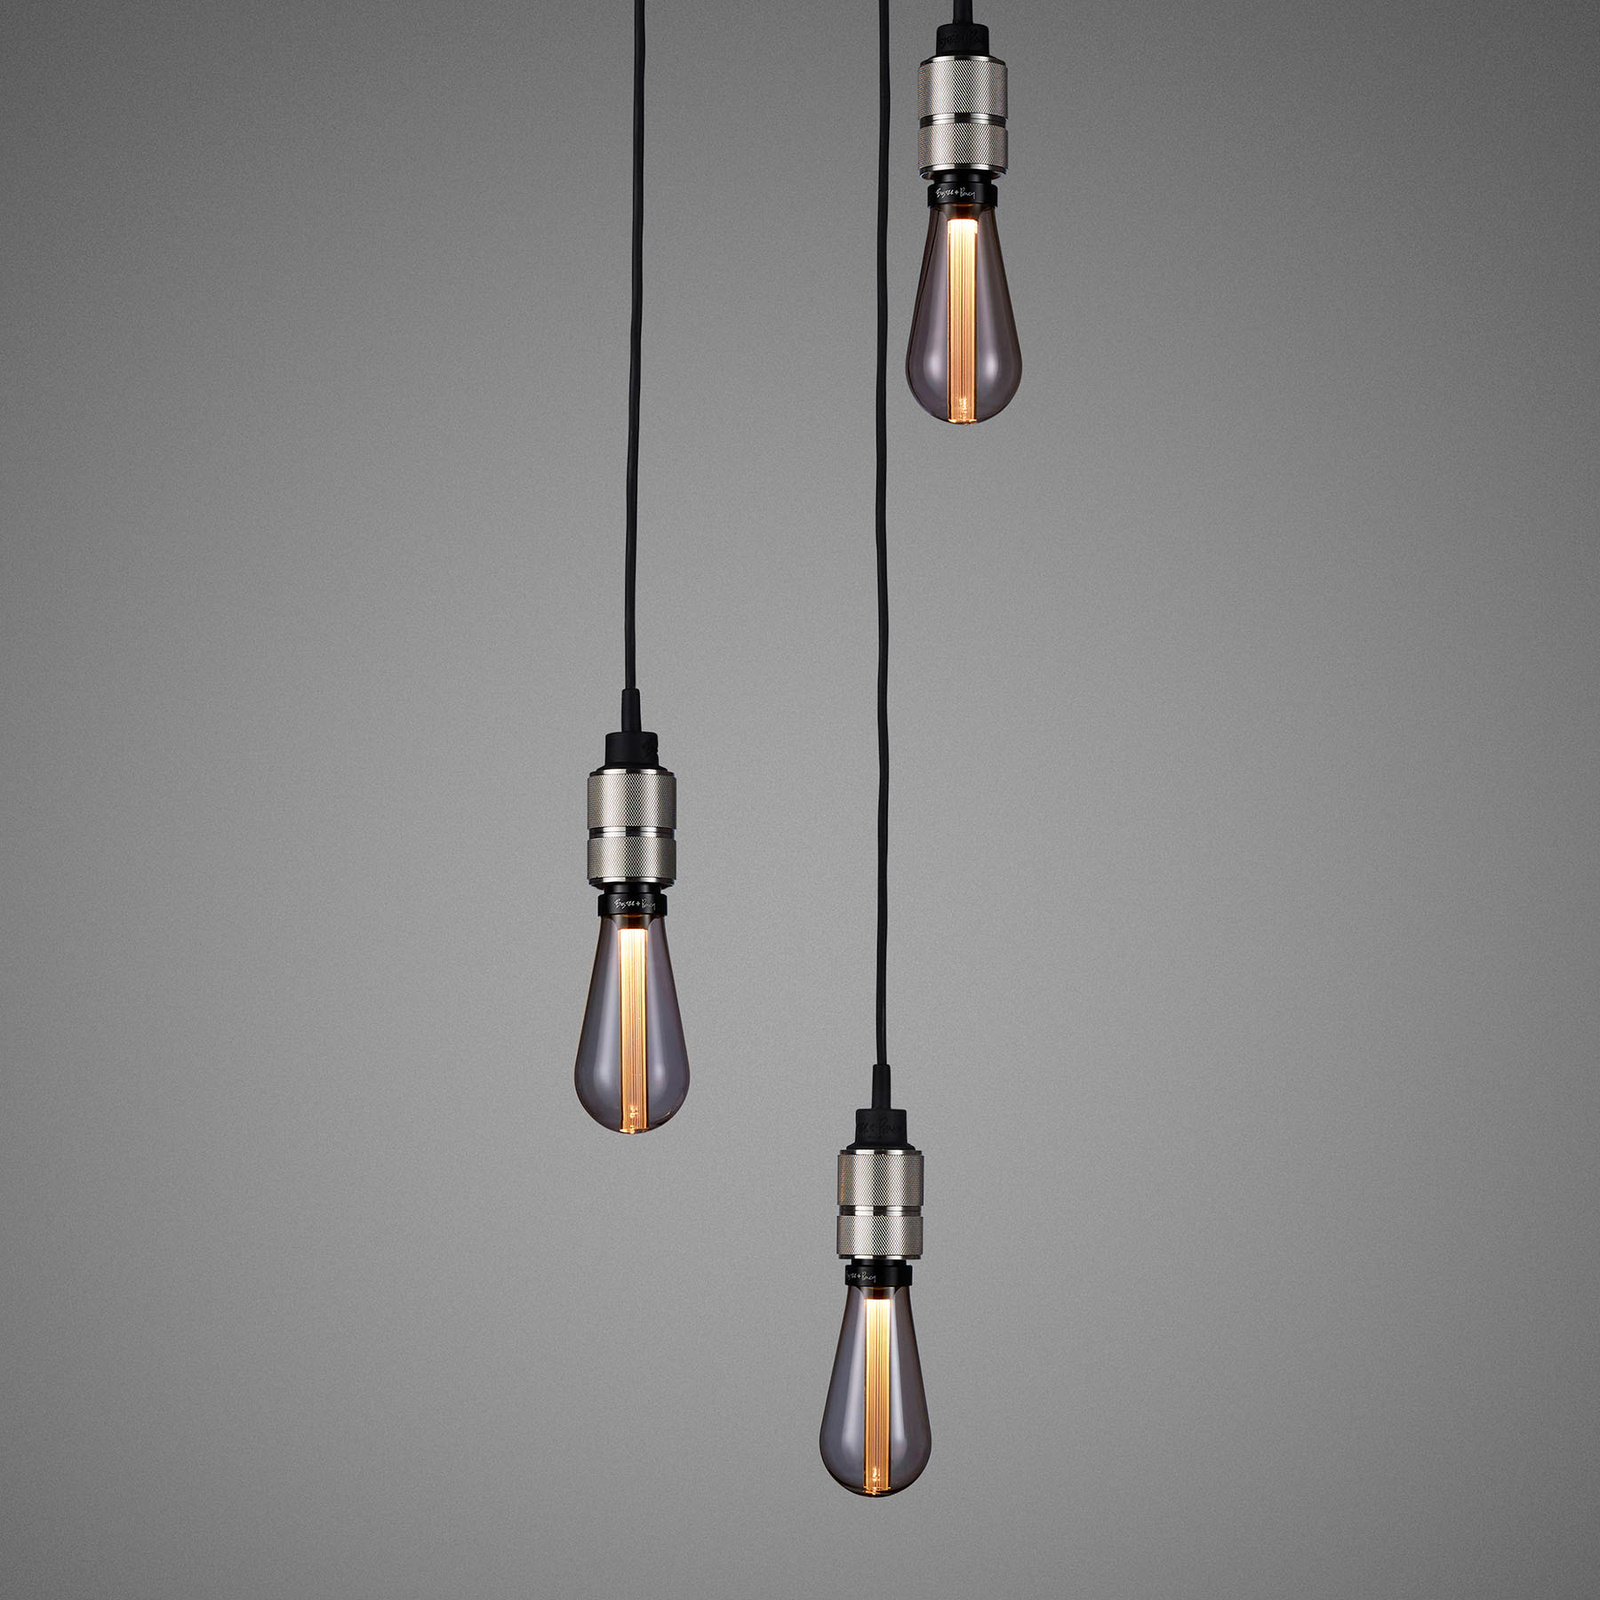 Buster + Punch Hooked 3.0 nude hanging light steel